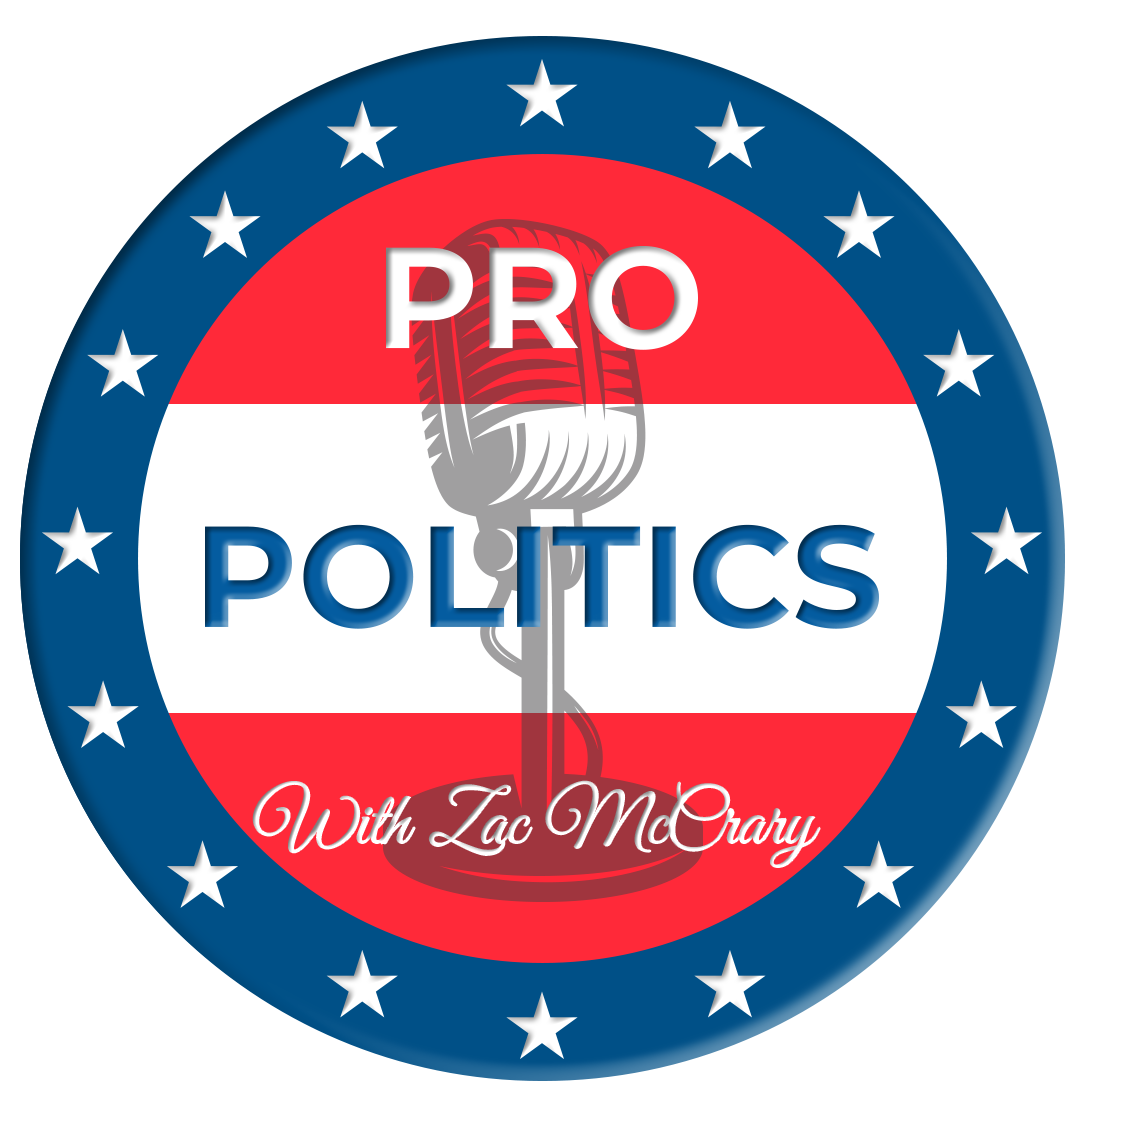 The Pro Politics Podcast Weekly Update